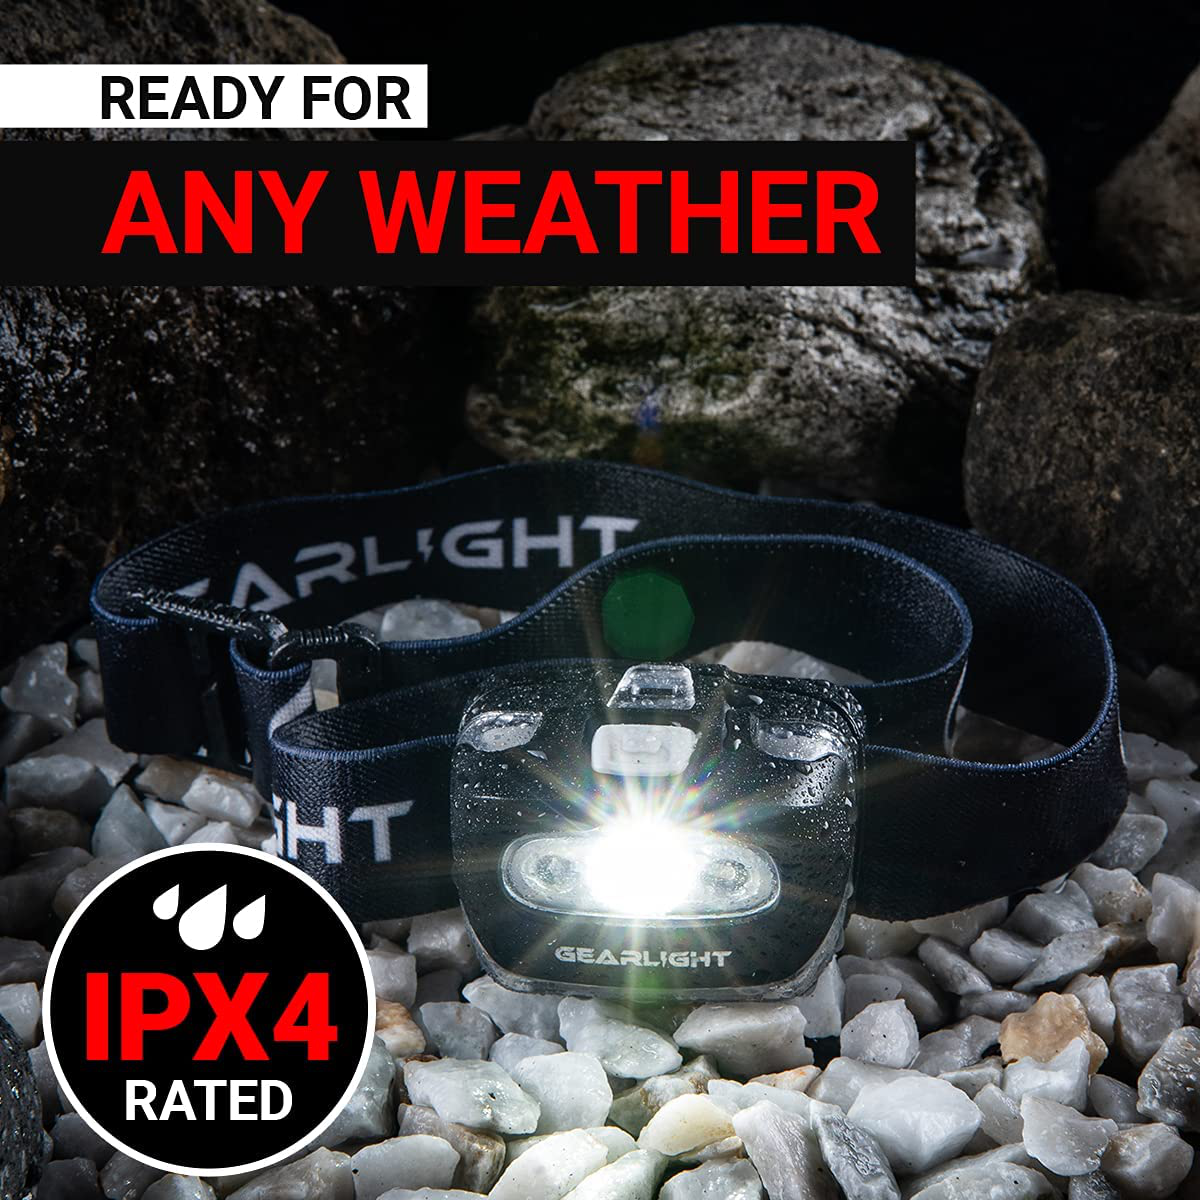 GearLight LED Headlamp Flashlight S500 [2 Pack] - Running, Camping, and Outdoor Headlight Headlamps - Head Lamp with Red Safety Light for Adults and Kids